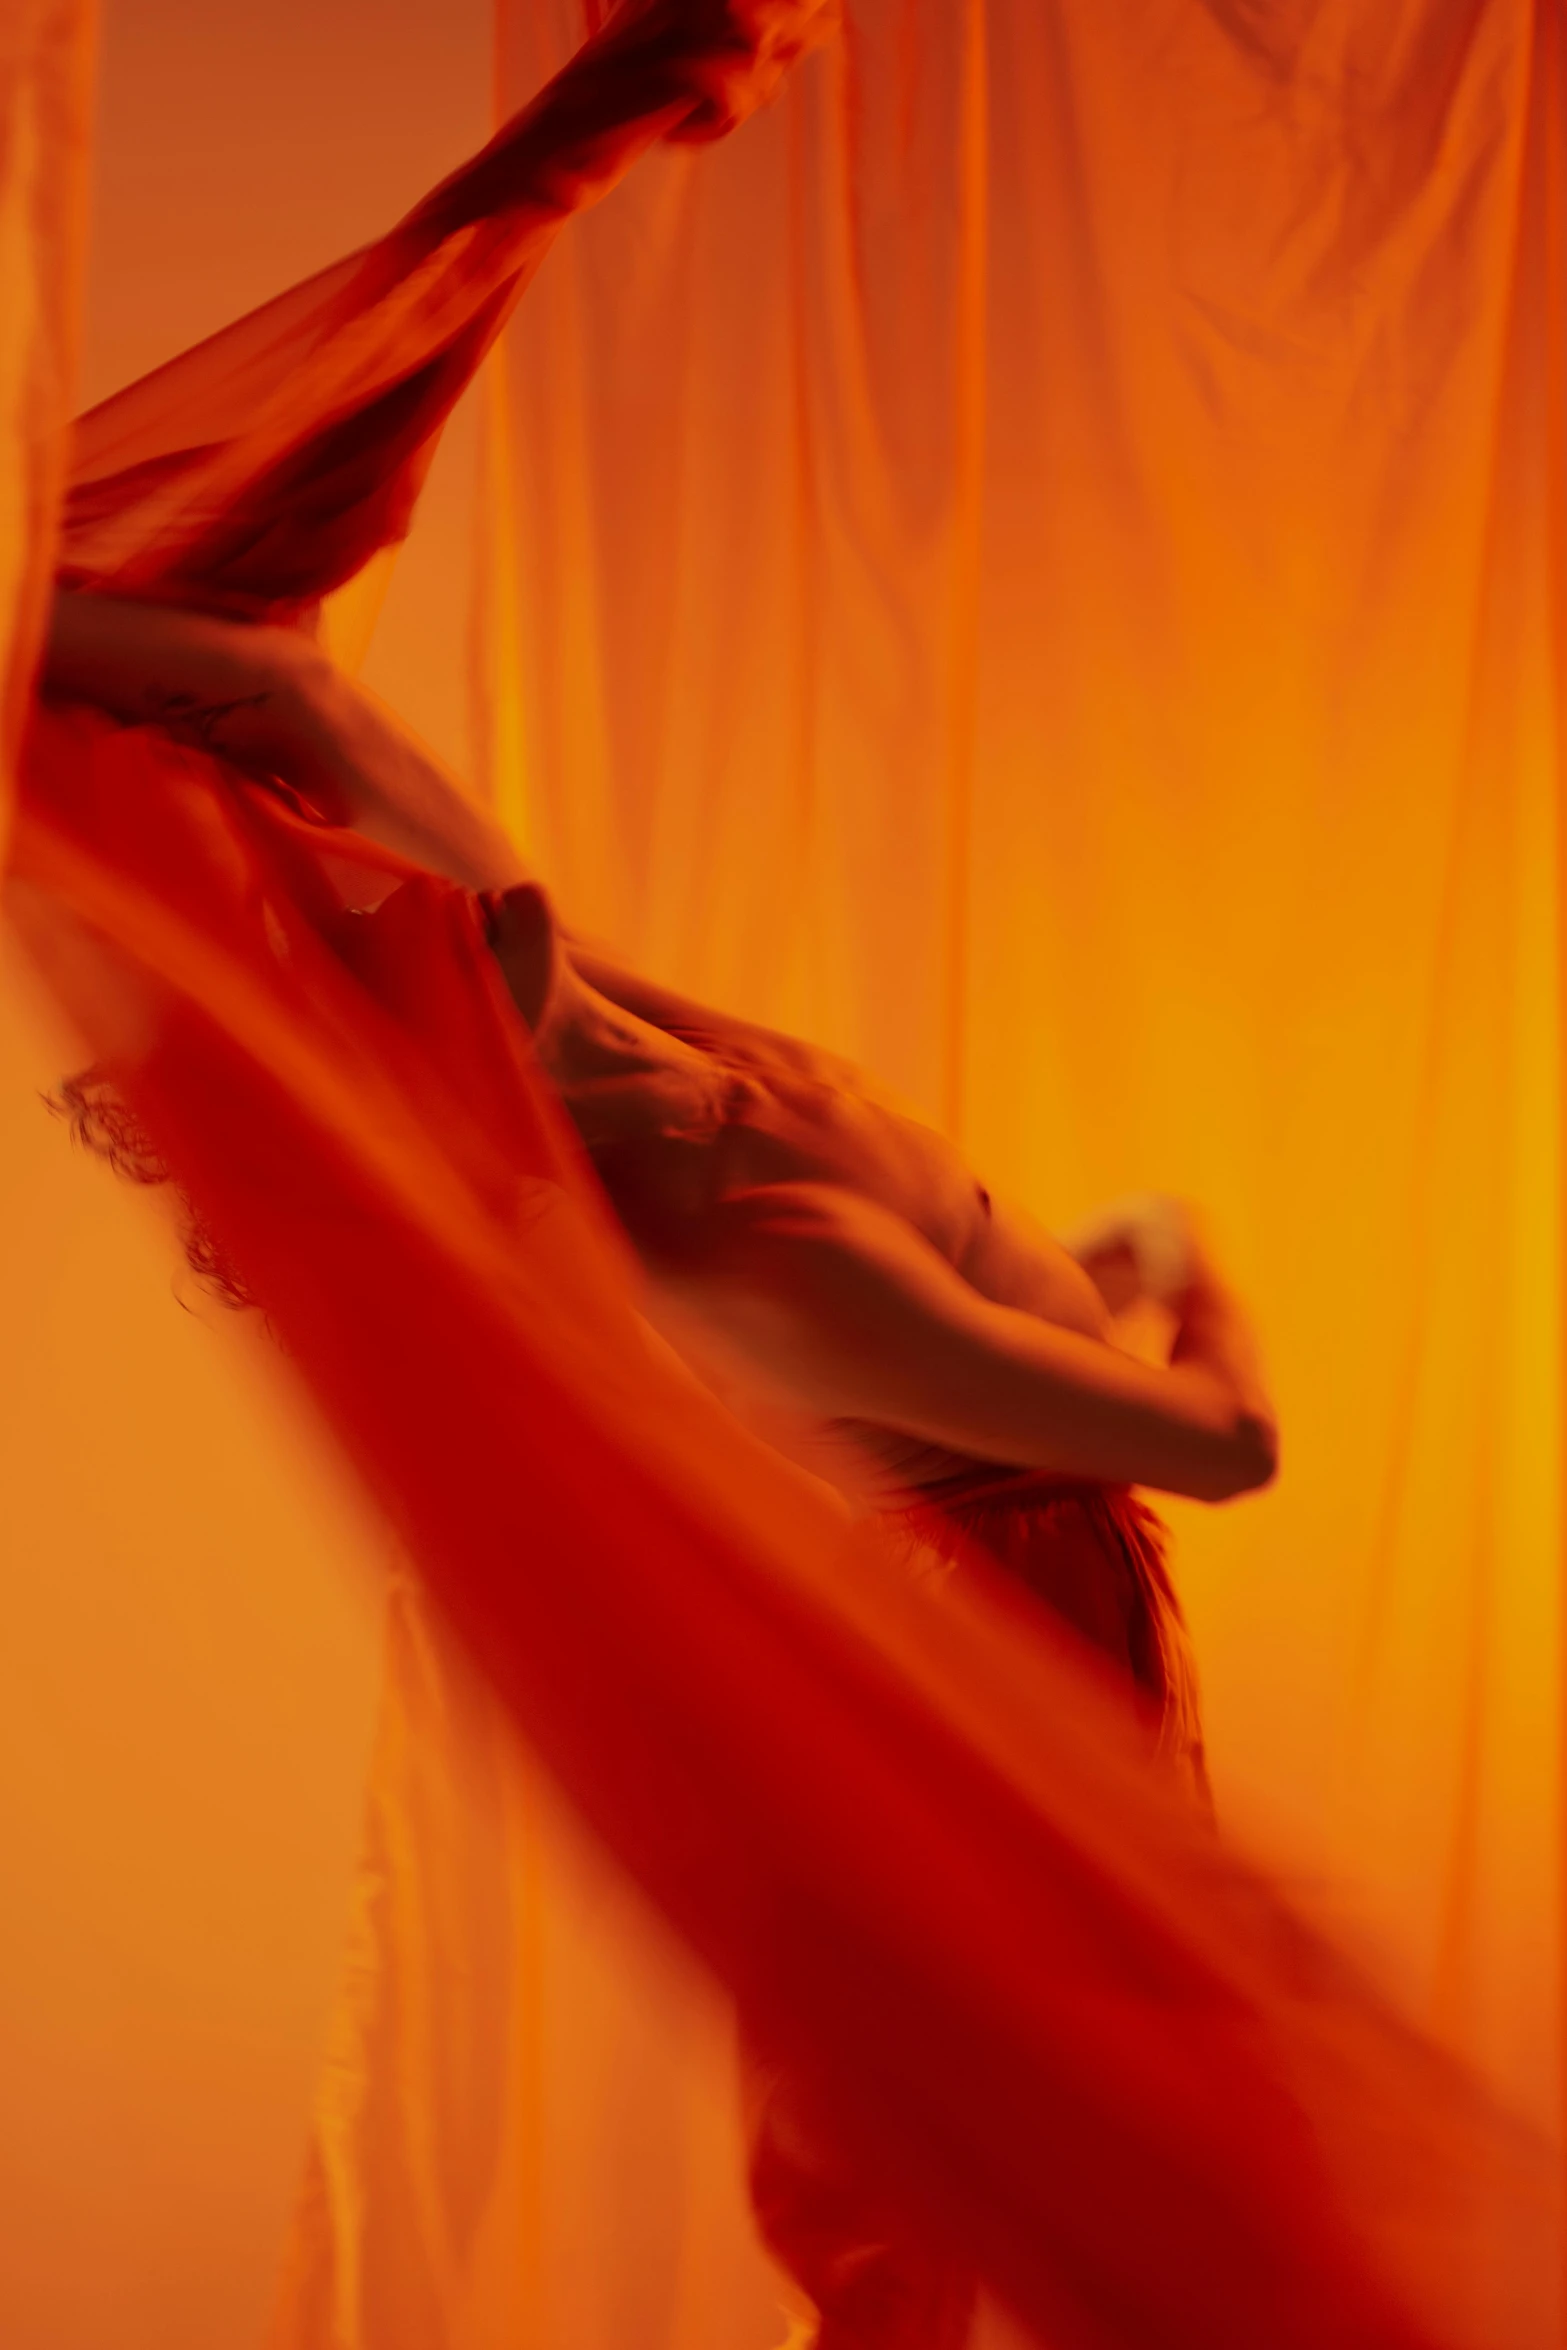 a woman that is standing in front of a curtain, an album cover, unsplash, arabesque, ryan mcginley, swirling red-colored silk fabric, orange light, showstudio